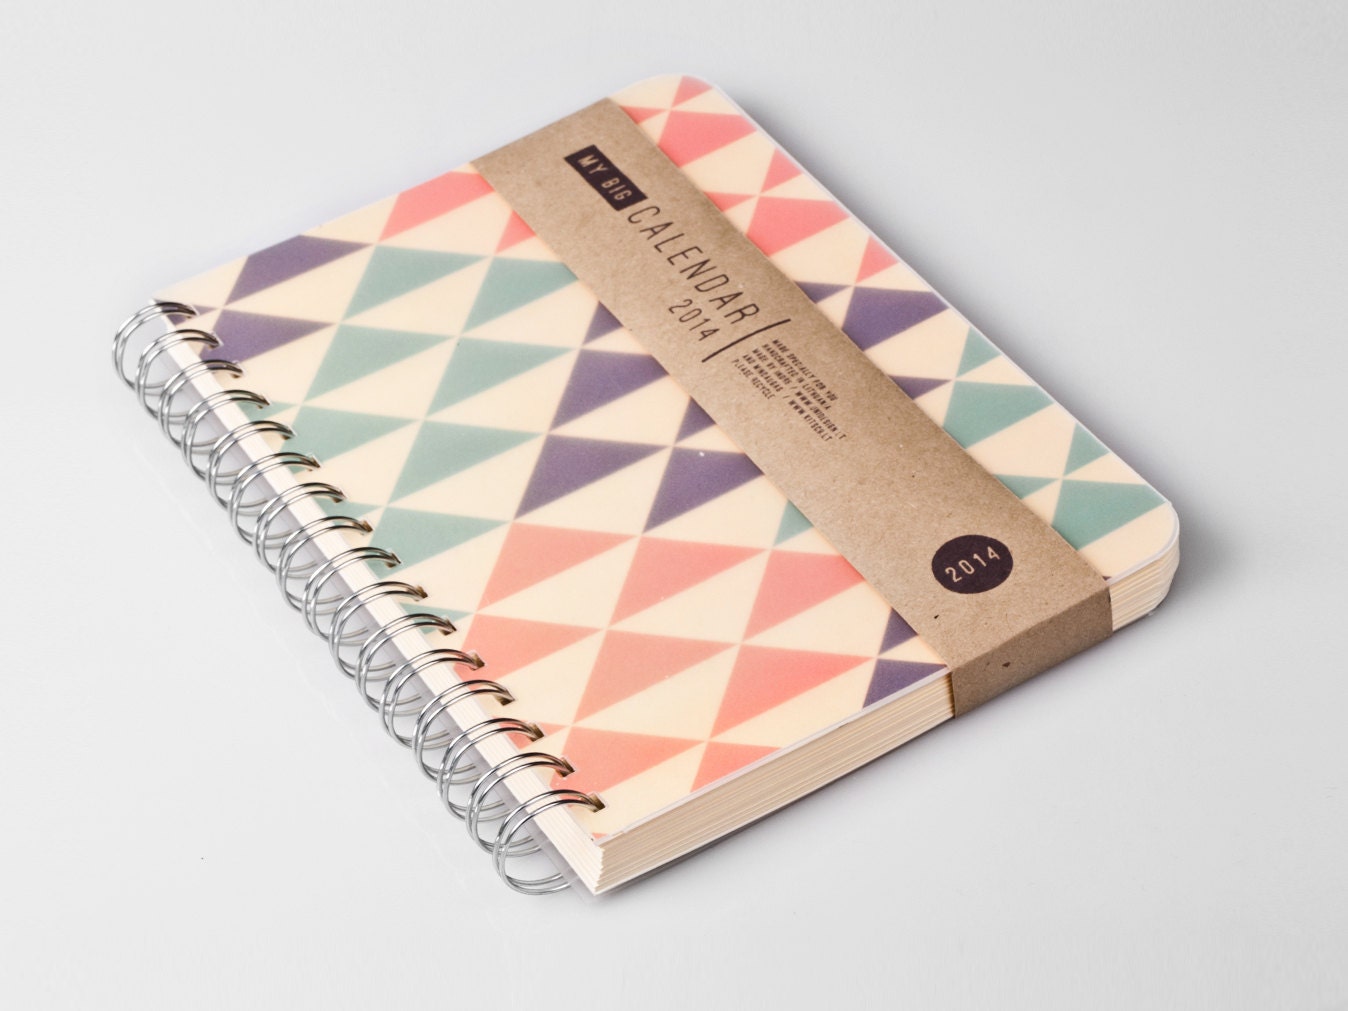 2014 Weekly Planner Calendar Diary Day Spiral A5 Triangle This Day Planner - Great Christmas Gift Idea - TheBigCalendar